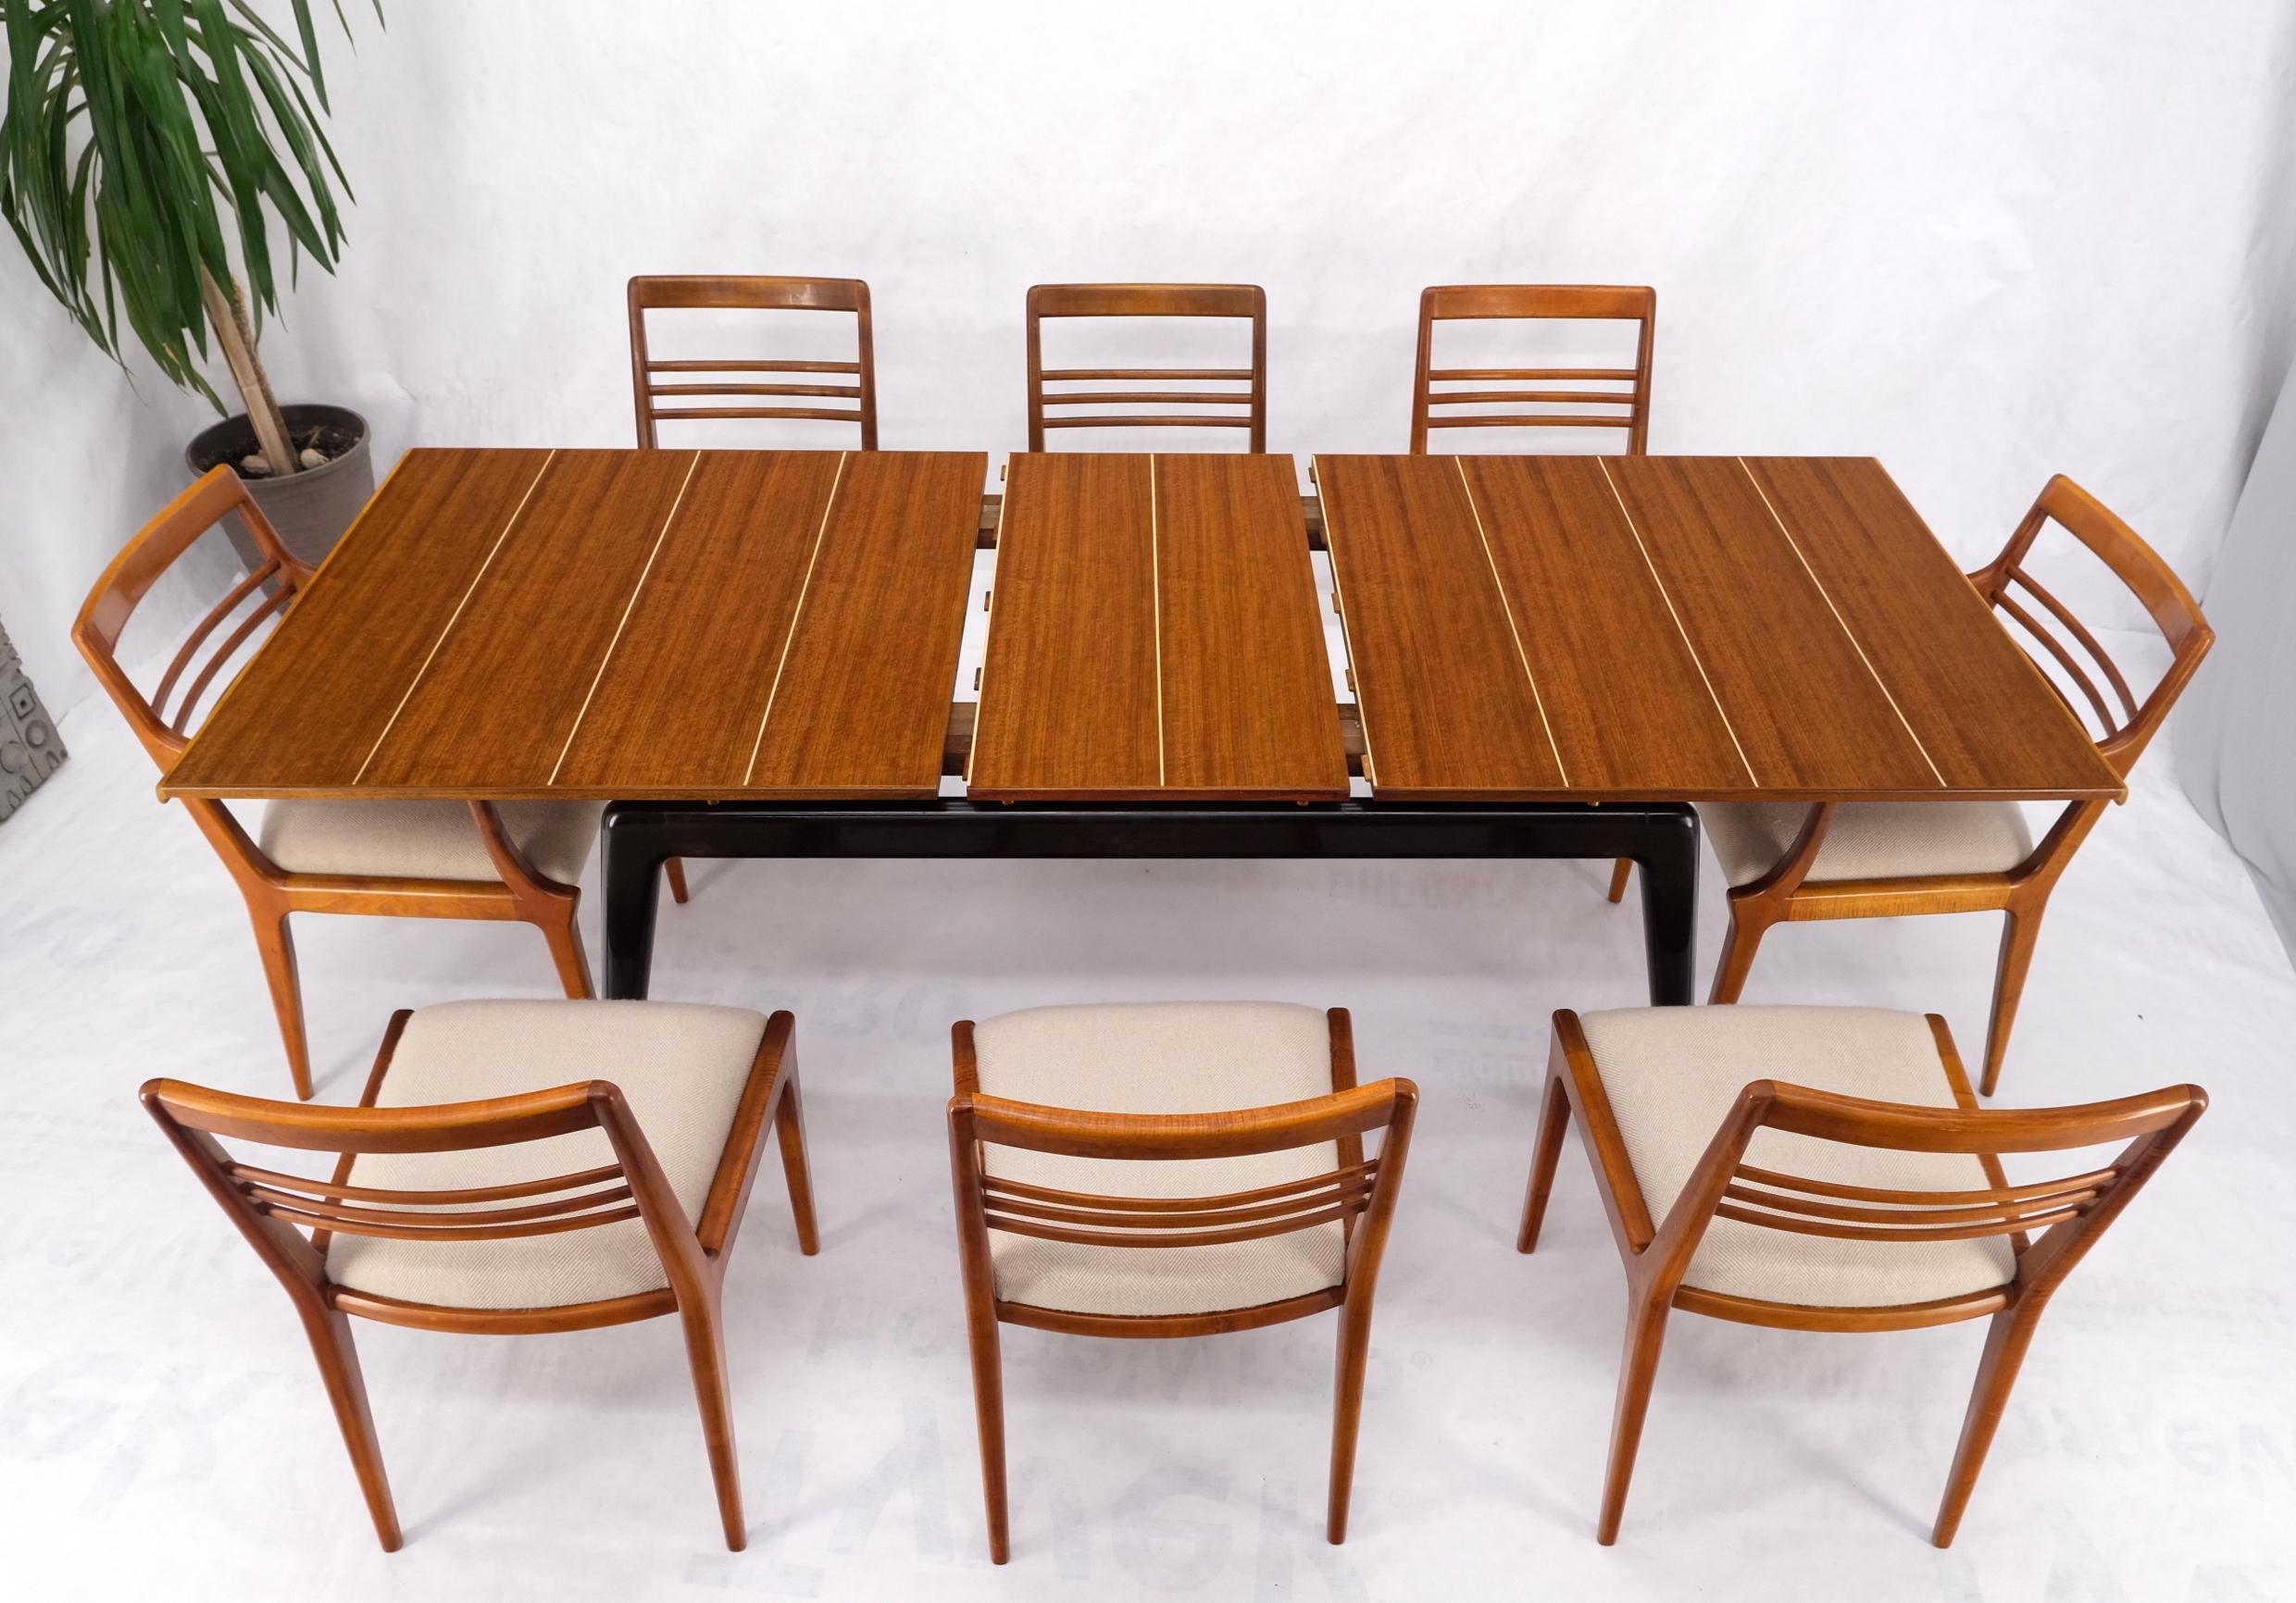 Italian Mid-Century Modern Dining Table 8 Chairs Set New Linen Upholstery Seats For Sale 9